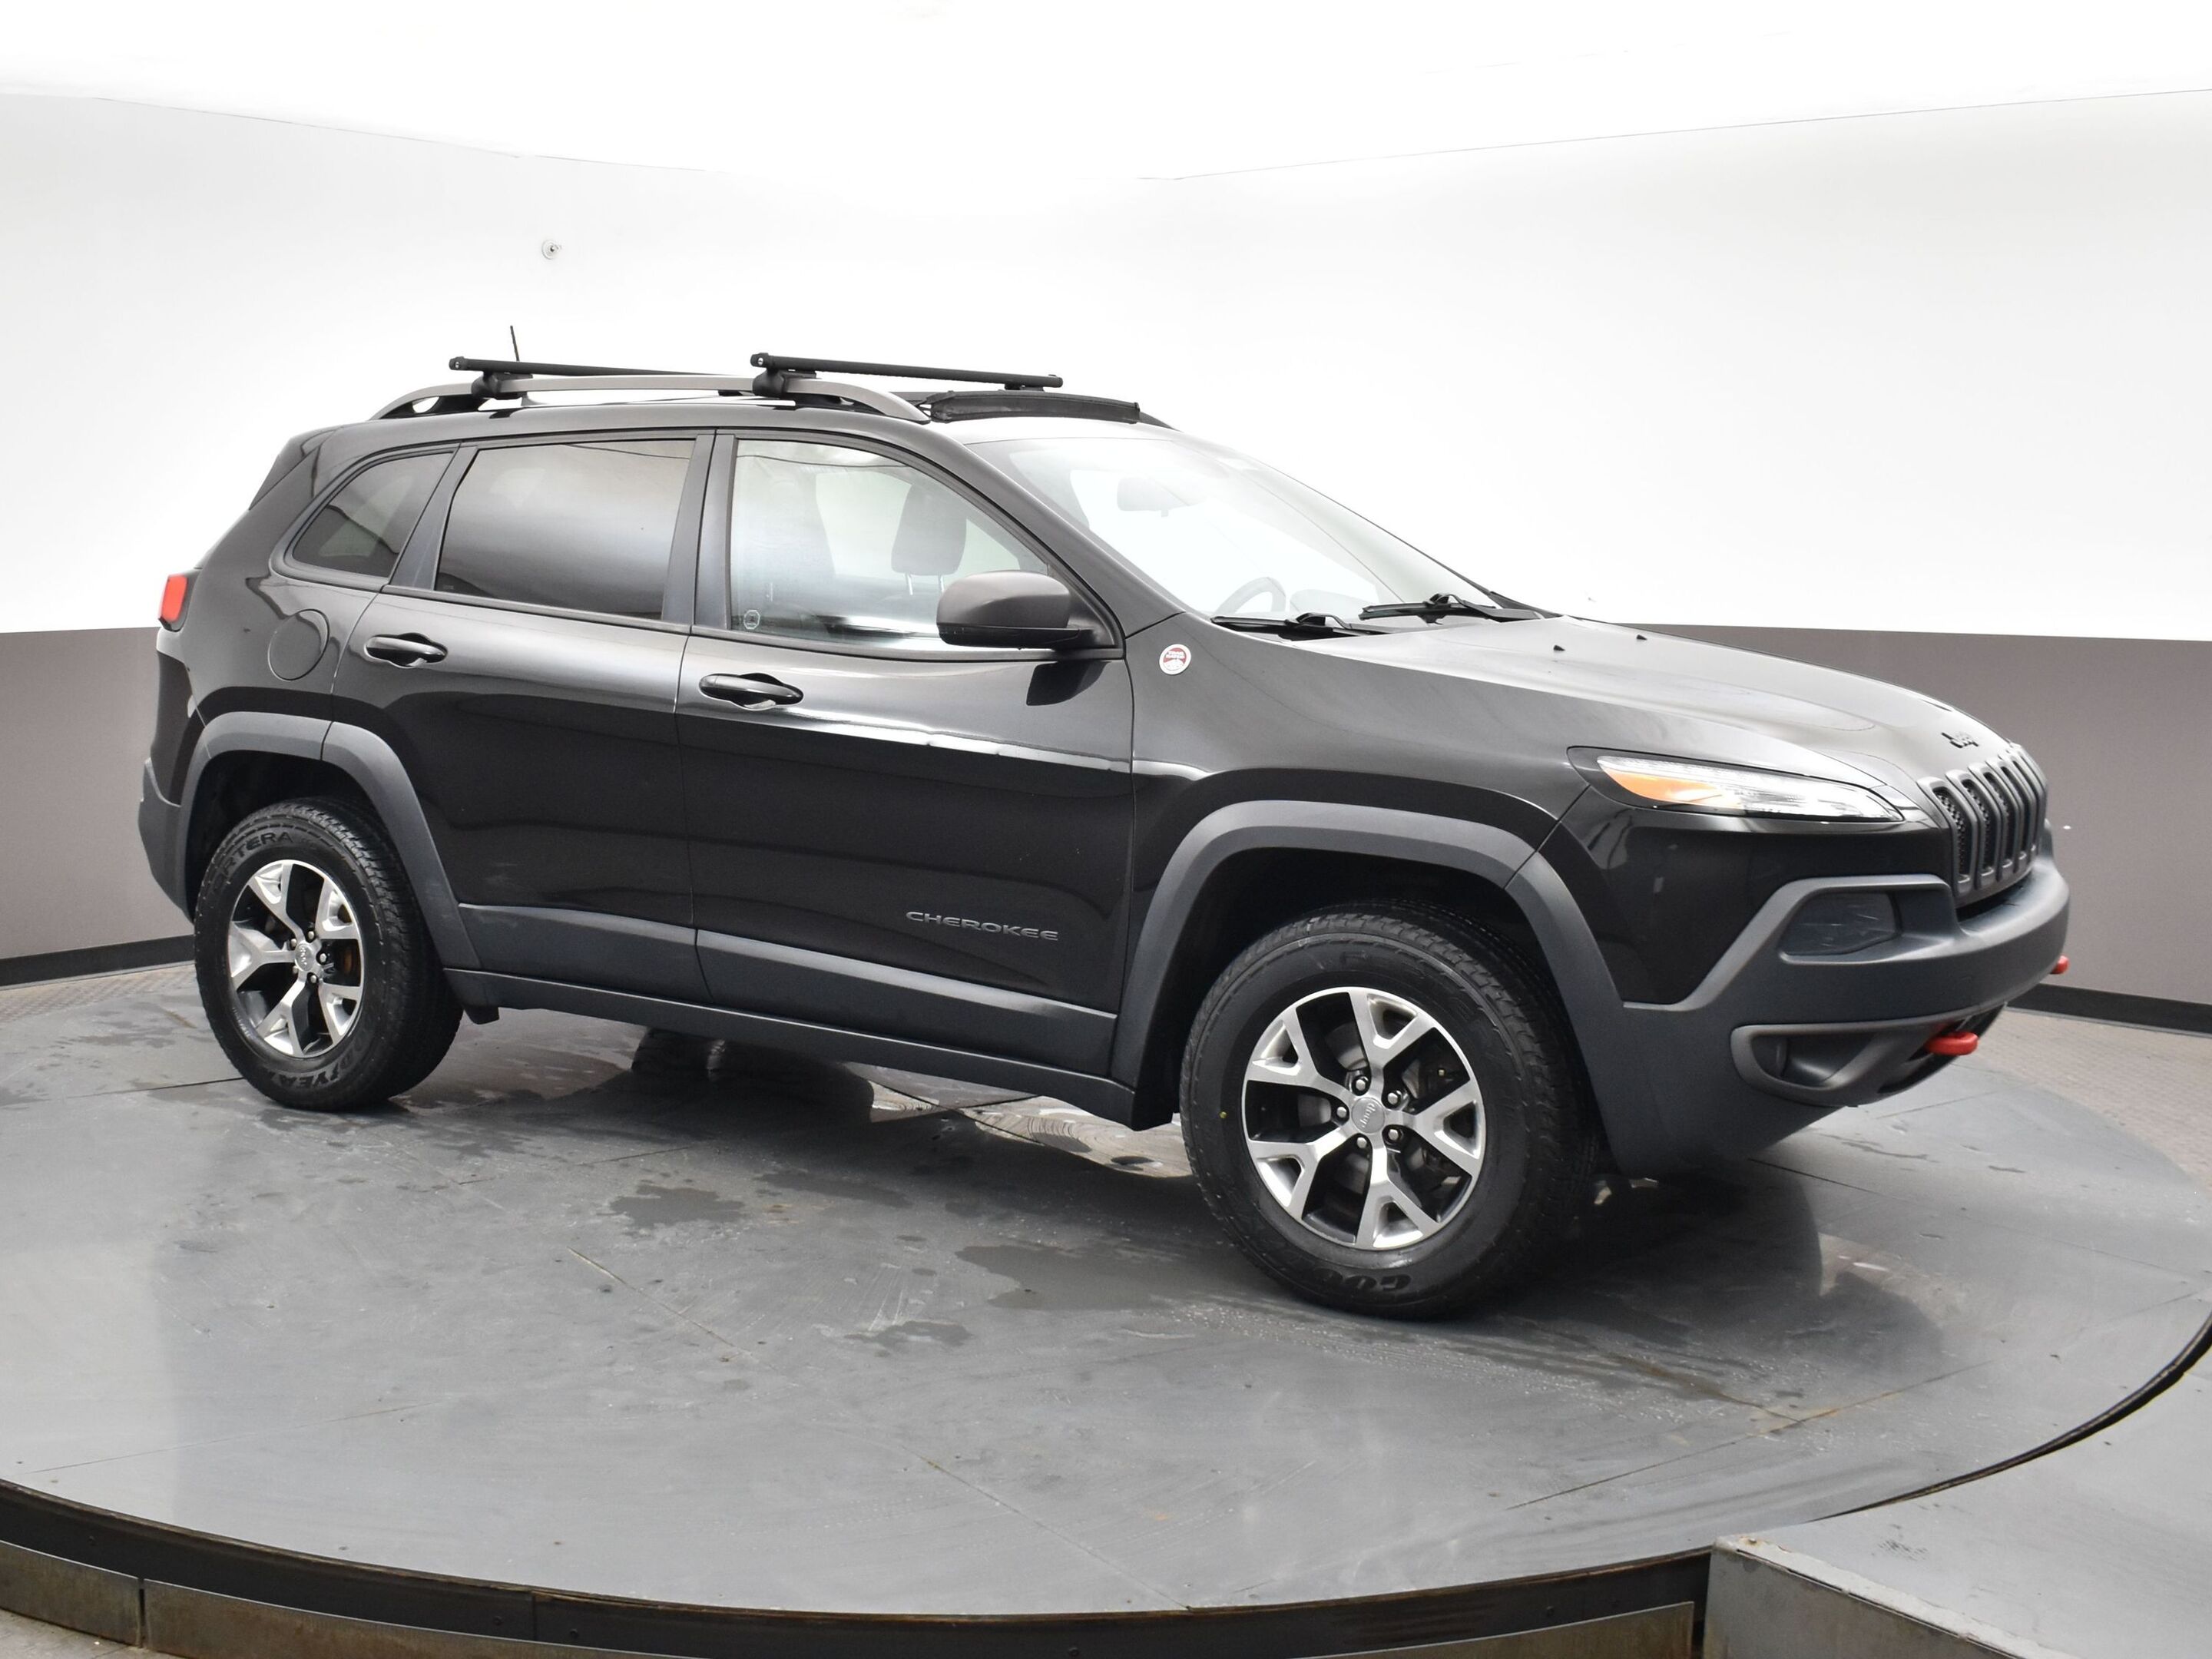 2016 Jeep Cherokee TRAIL RATED 4X4 DUAL CLIMATE CONTROL| BACKUP CAMER